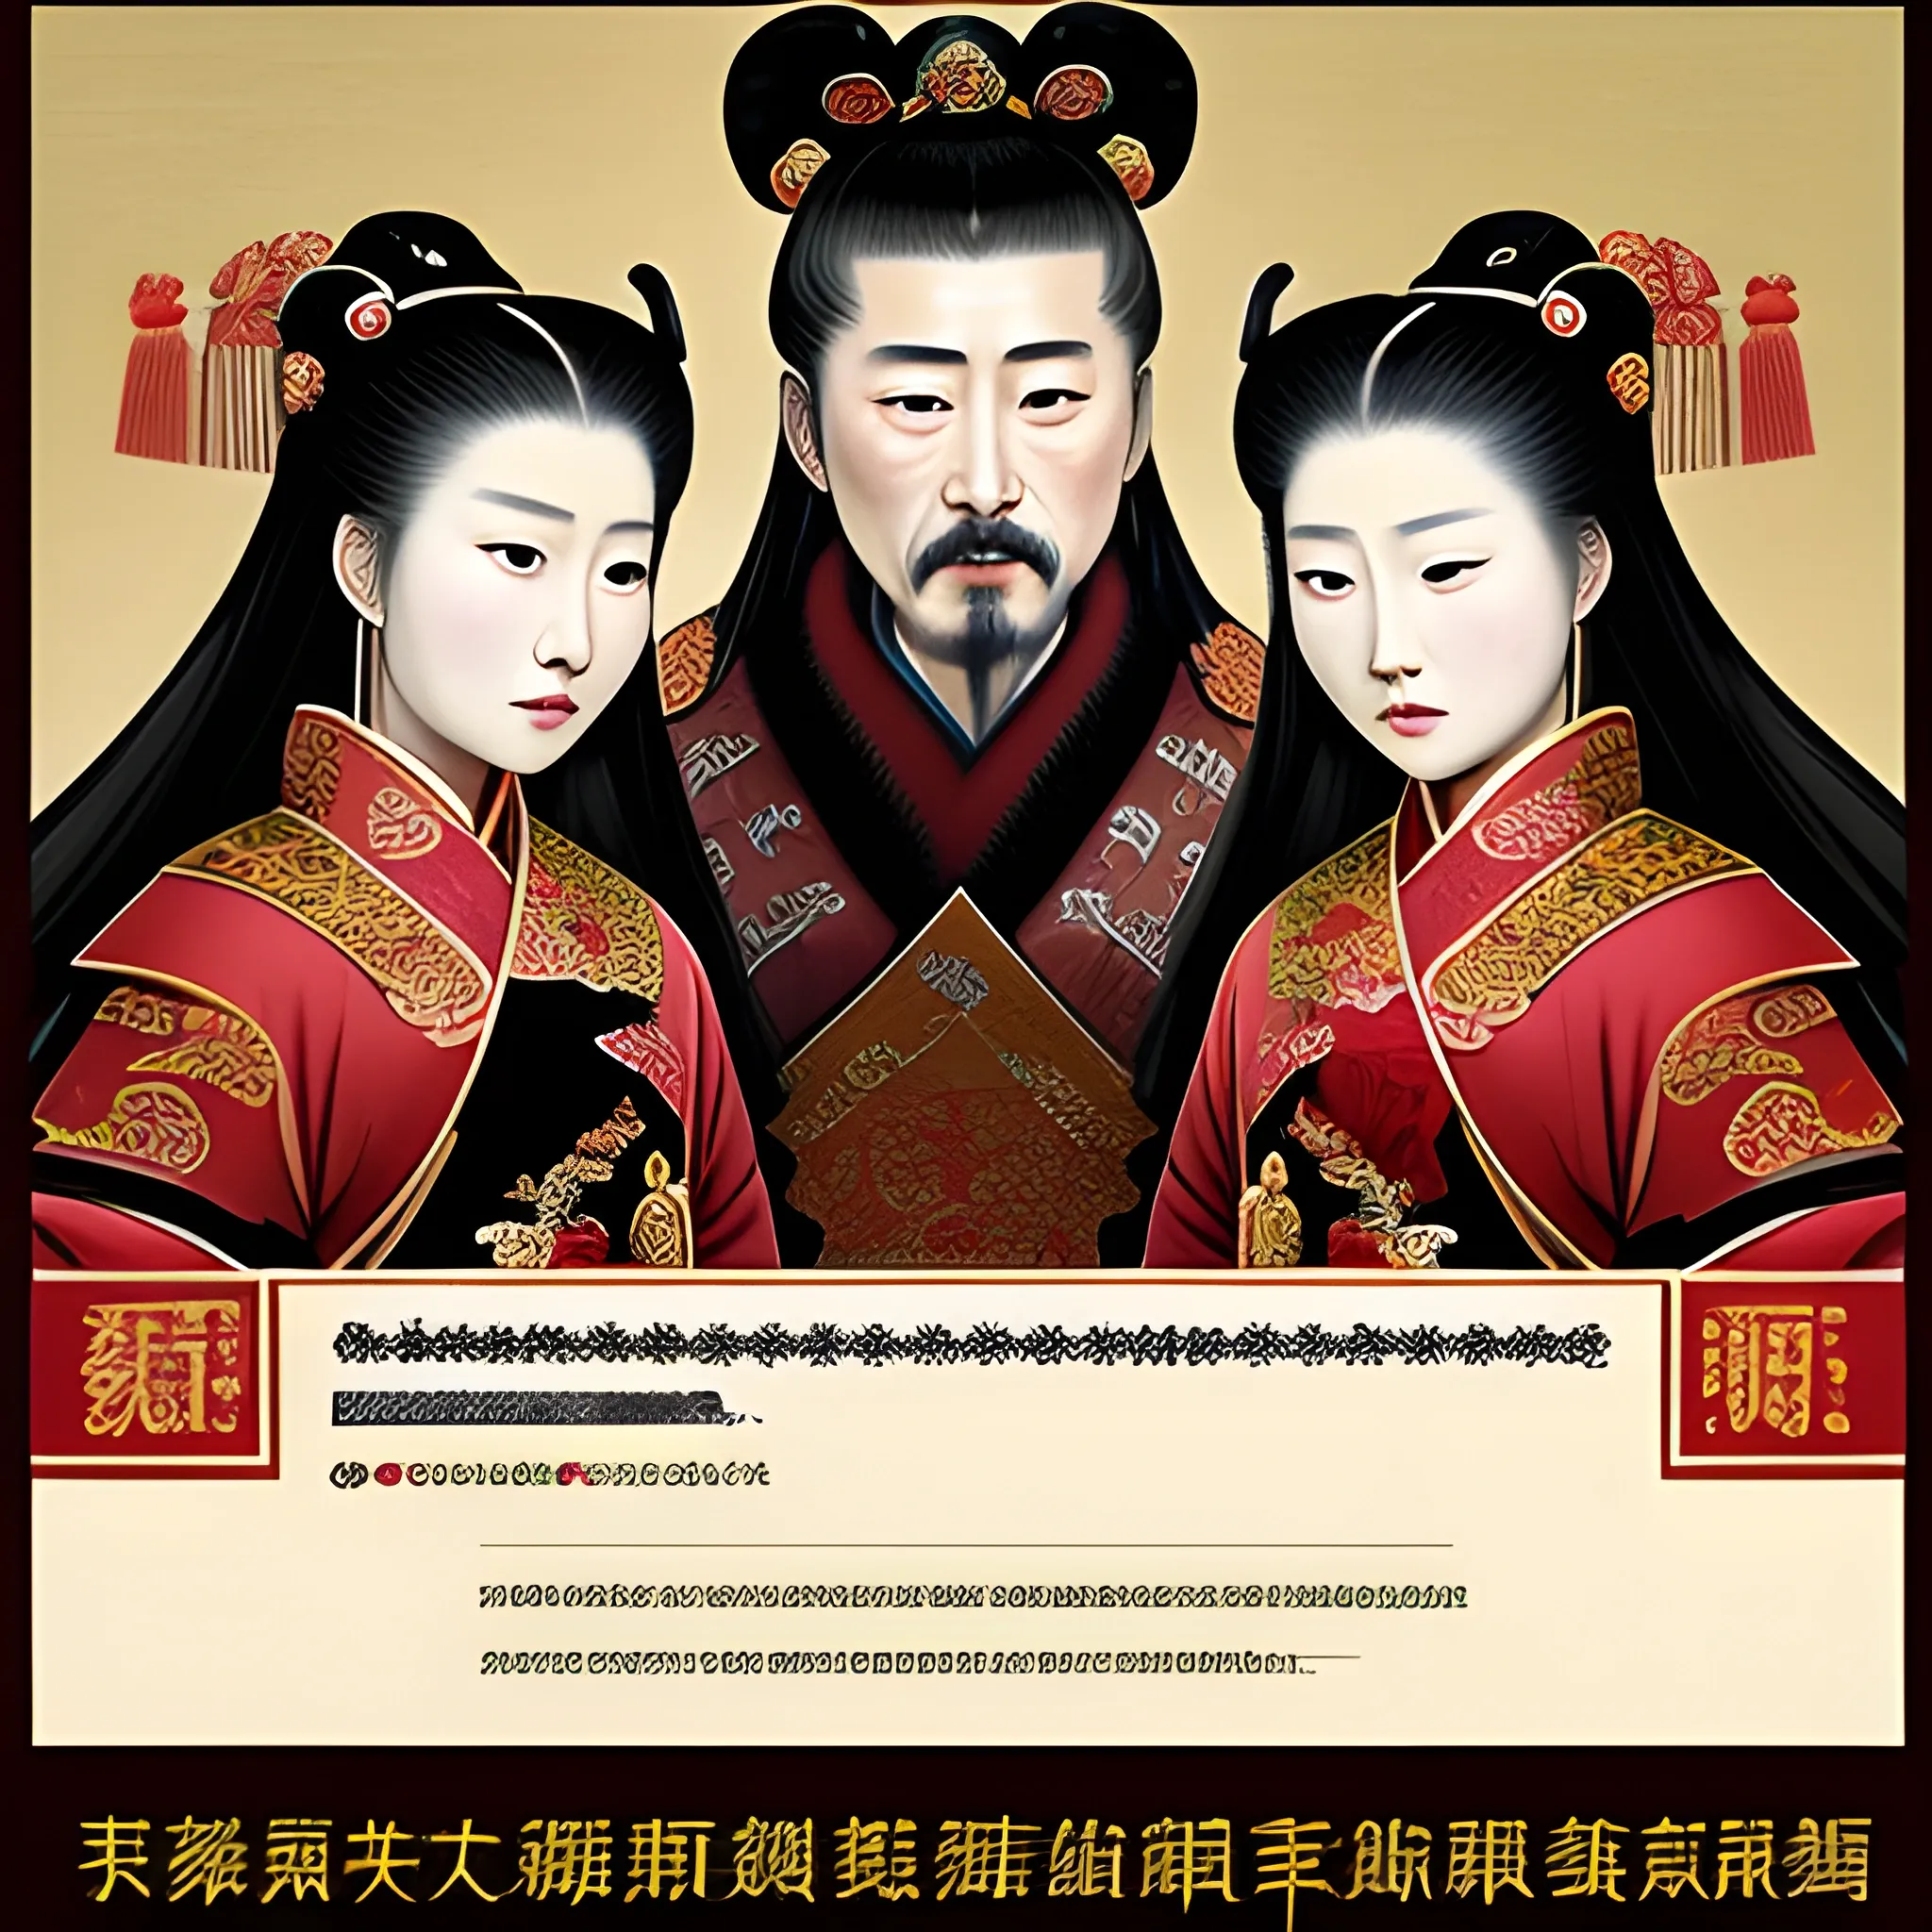 China's Northern Song Dynasty
Northern Song emperor and his concubines were captured by the Kingdom of Jin